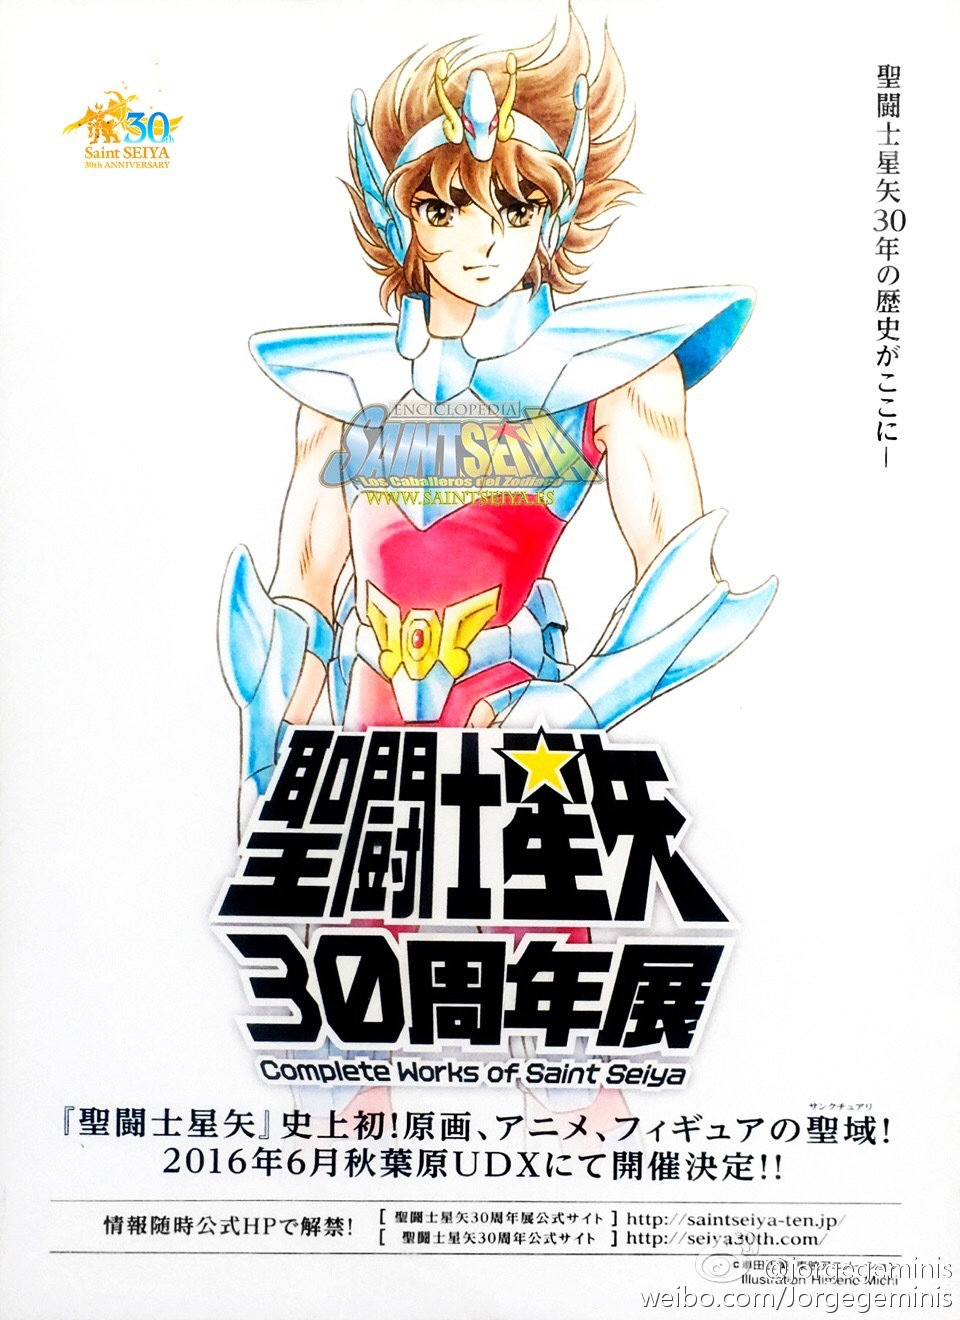 Exposition "Complete Works Of saint Seiya, 30th Anniversary" (18 au 29 Juin 2016) - Page 2 Pw3z